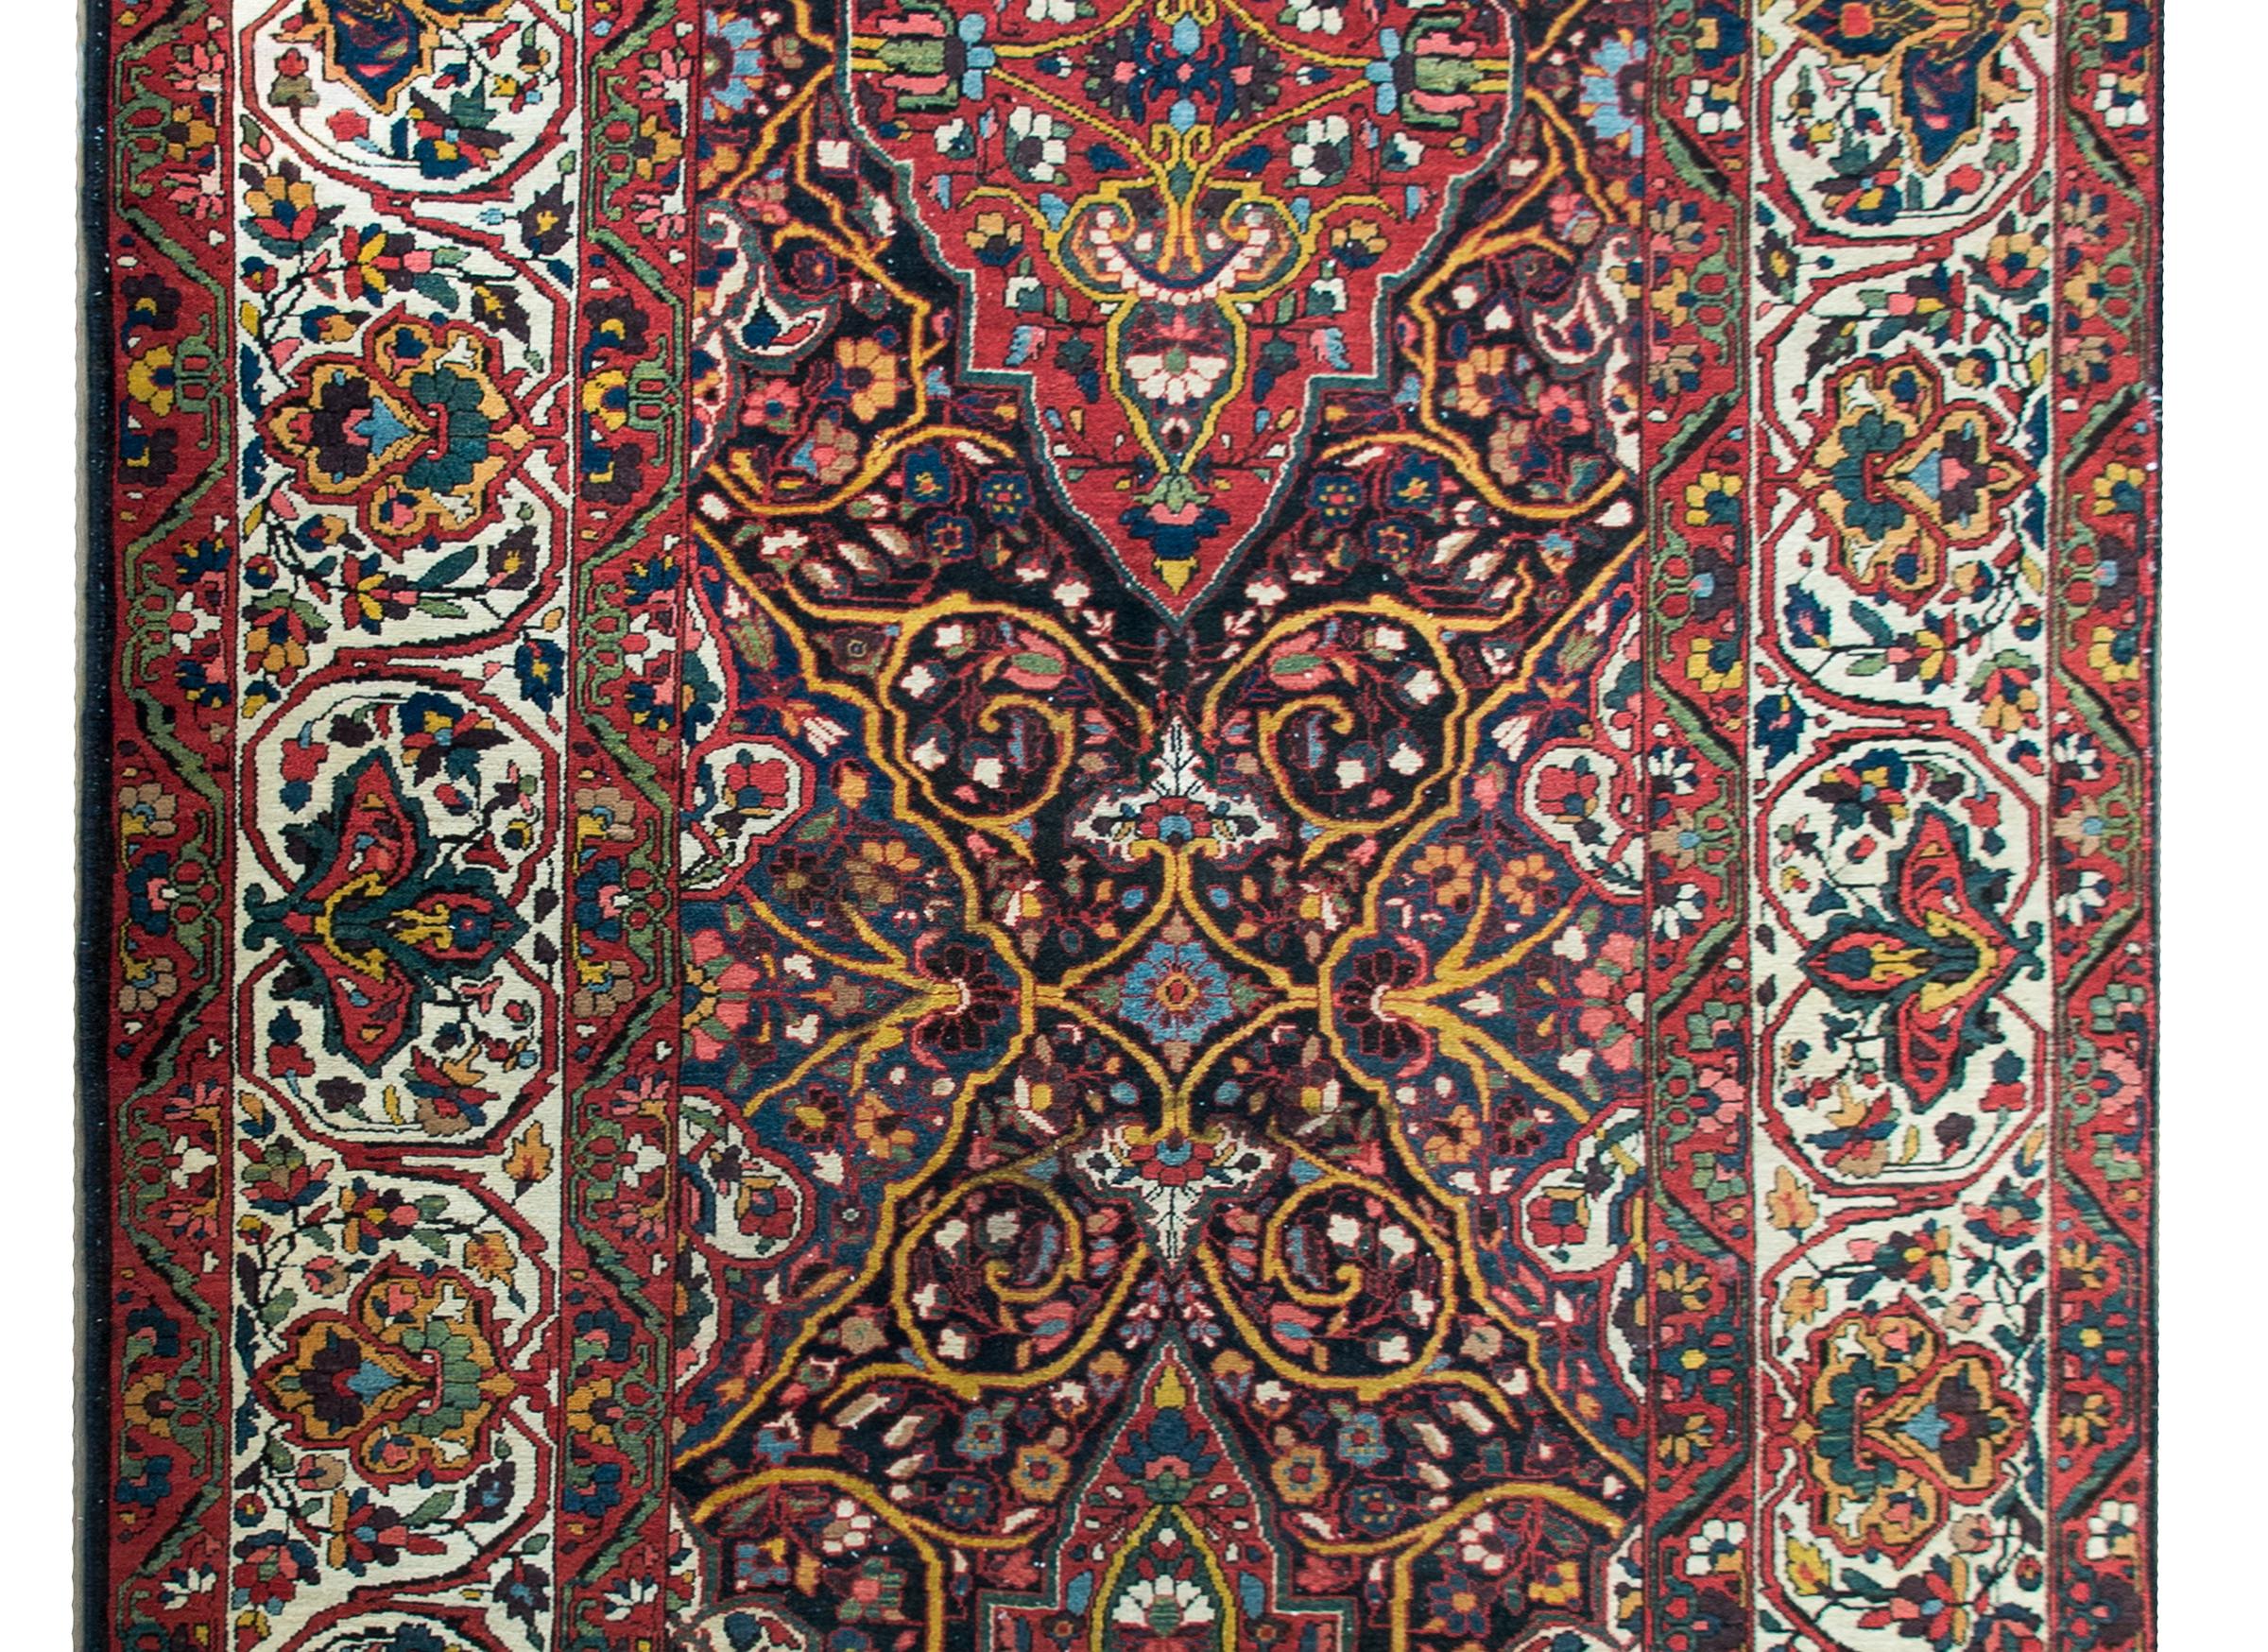 An wonderful early 20th century Persian Bakhtiari rug with two large medallions composed of myriad scrolling vines and flowers woven in a rainbow of colors including crimson, indigo, green, yellow, pink, and white, and surrounded by a wide complex